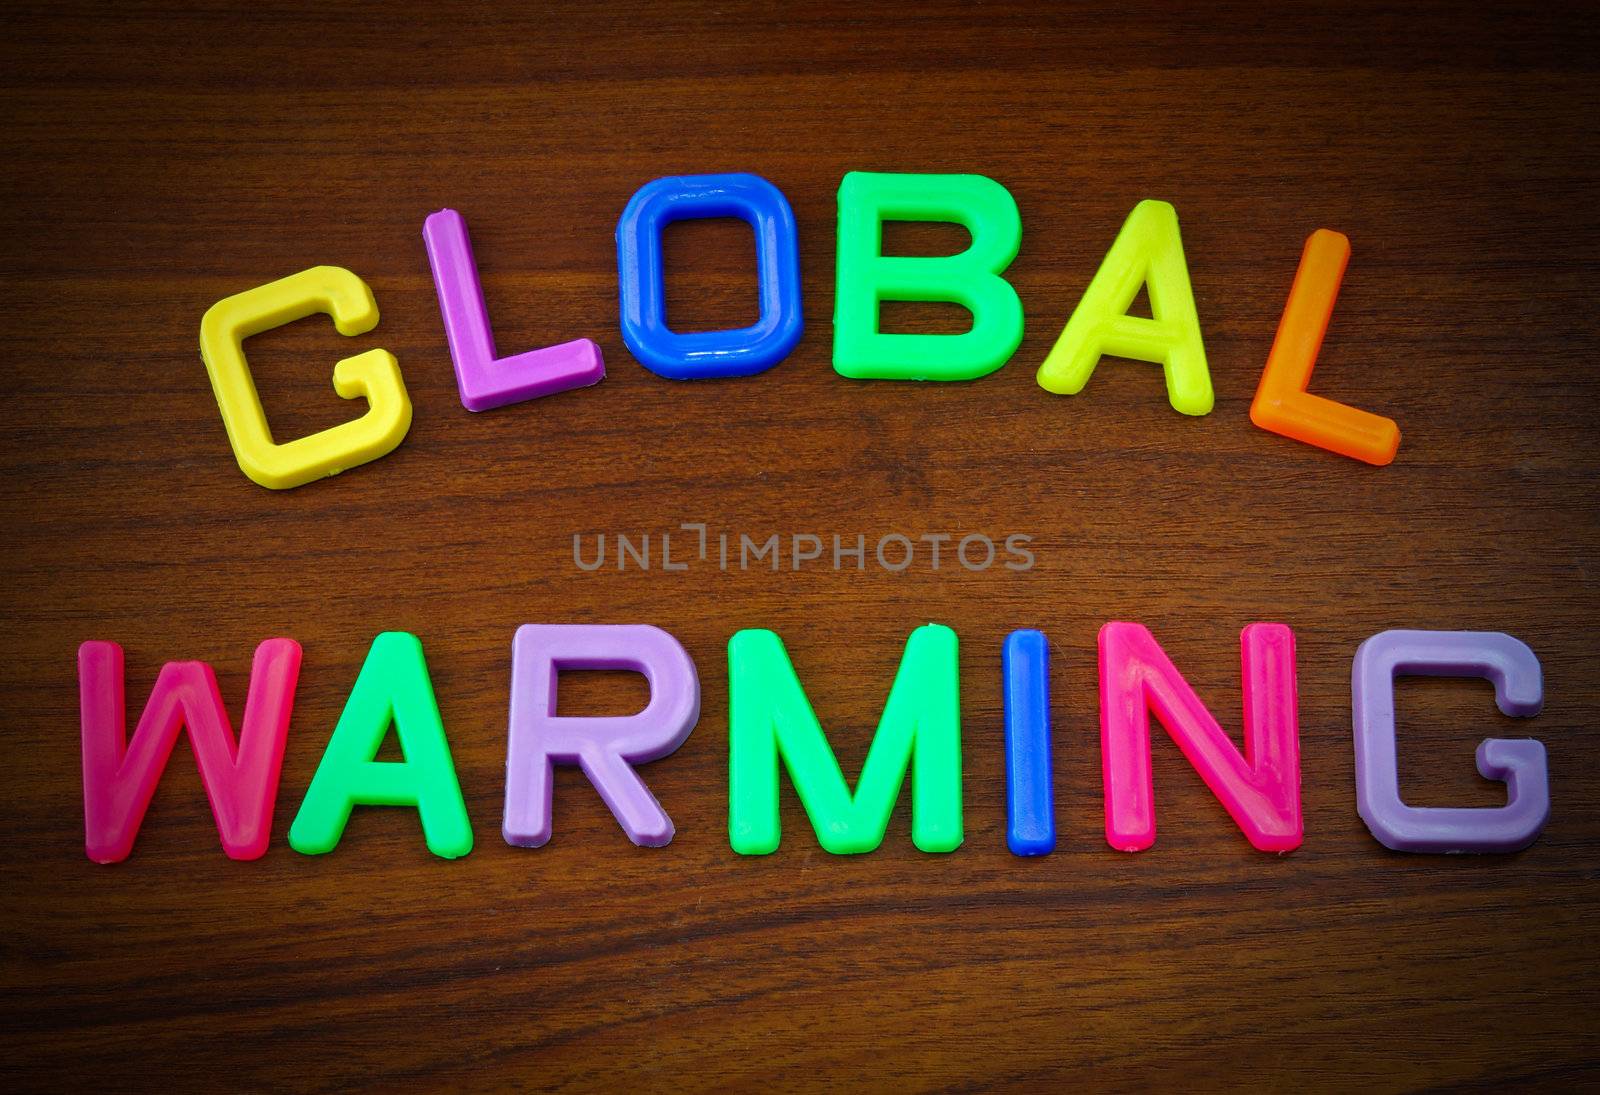 Global warming in colorful toy letters on wood background by nuchylee